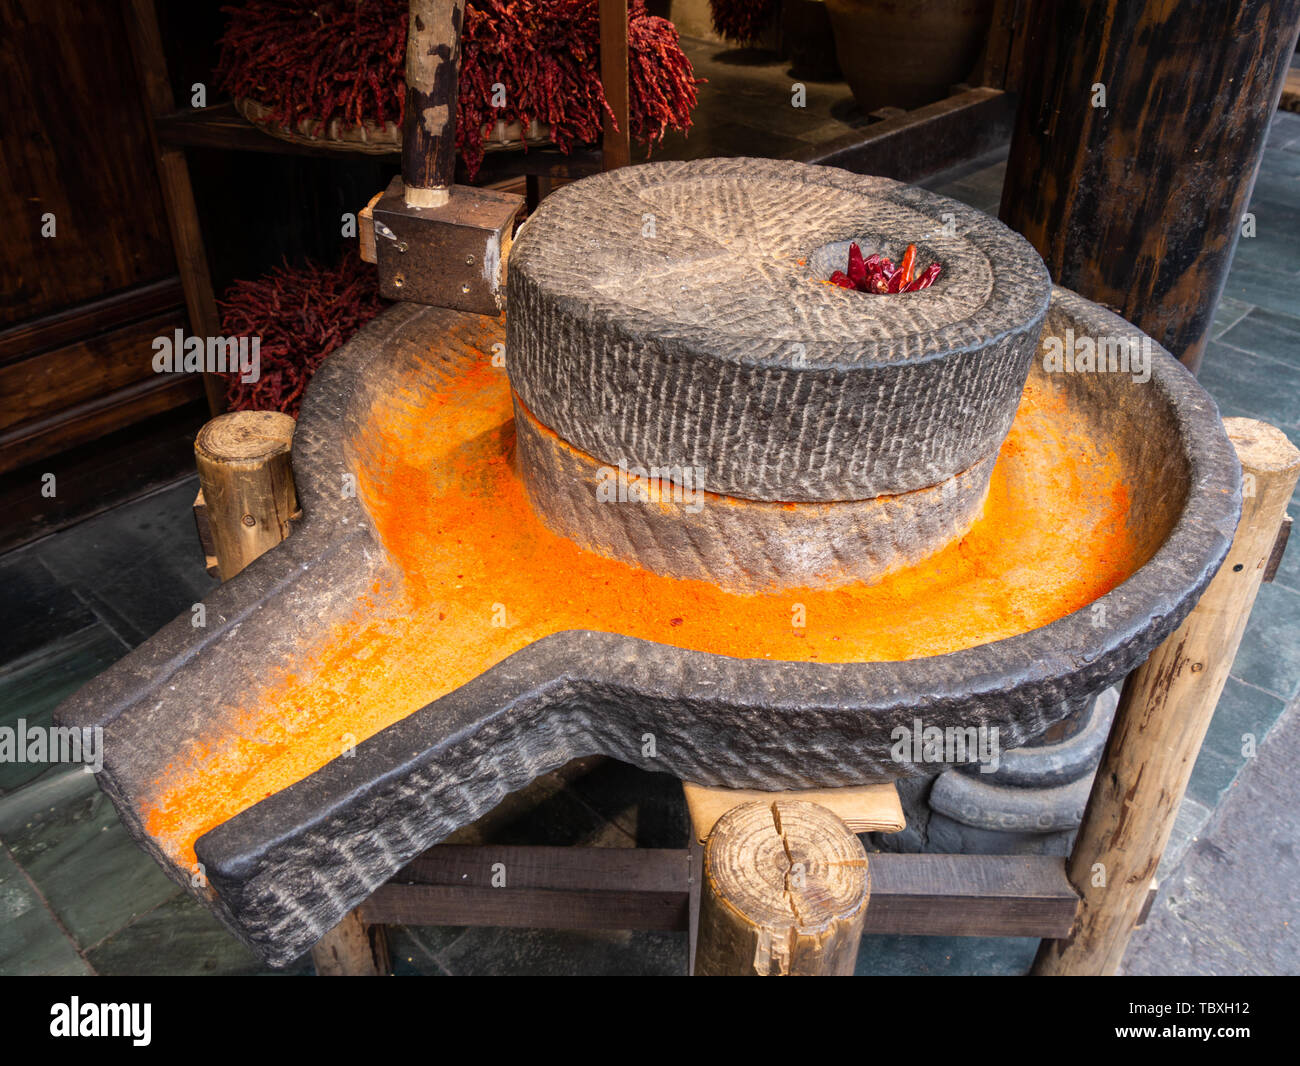 Stone grind of chili noodles. Stock Photo